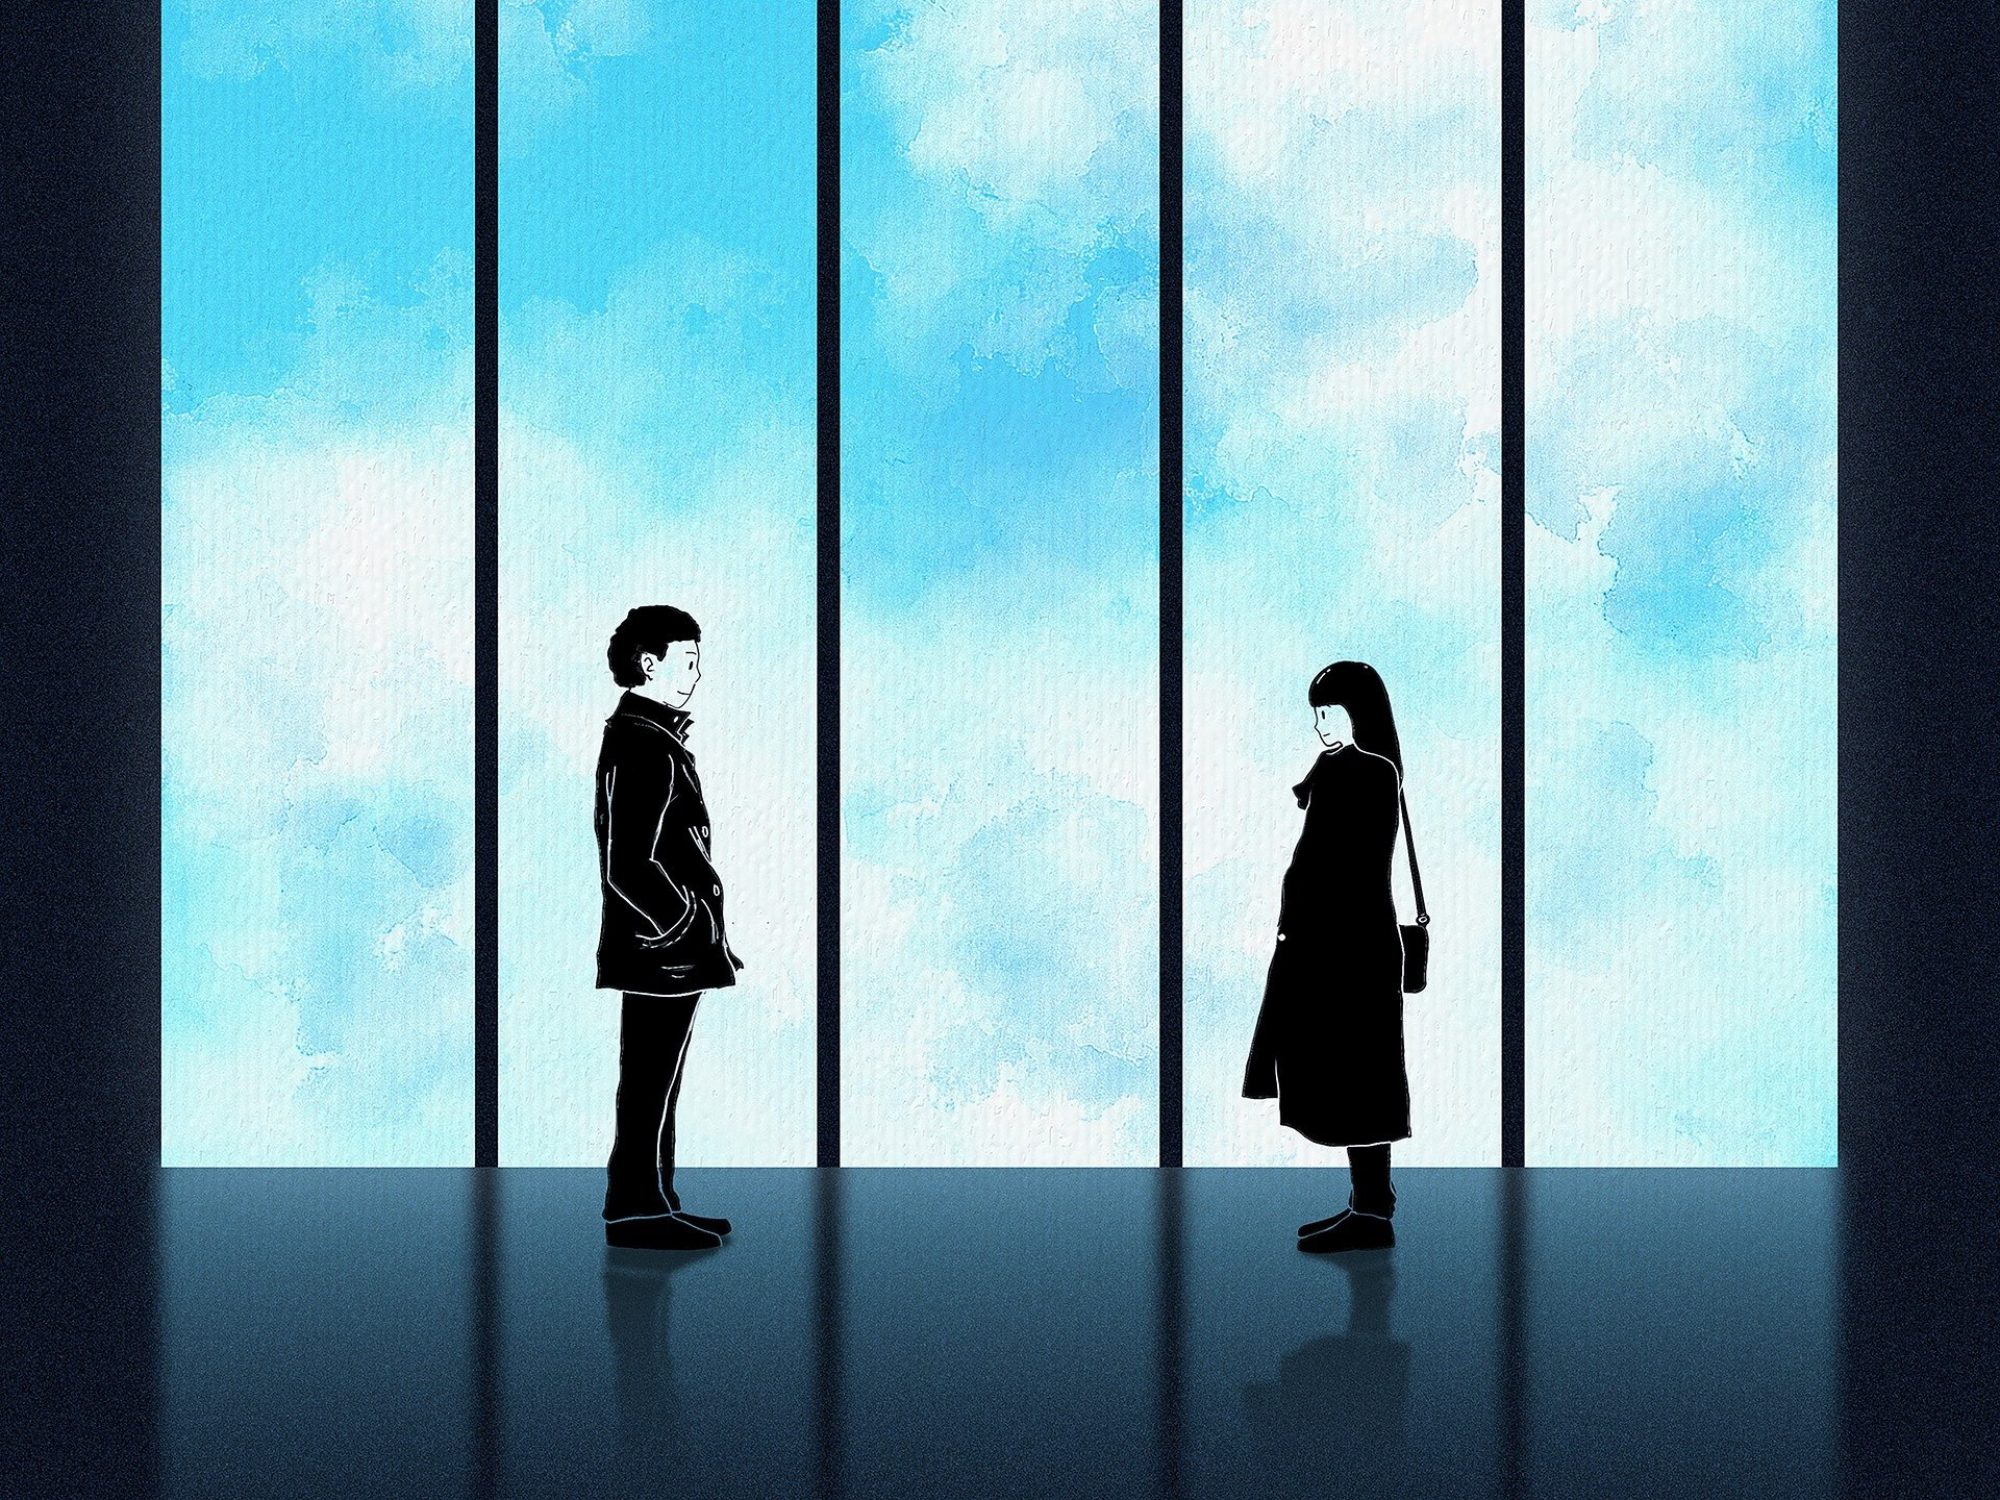 Sky background with a male and female figure facing each other